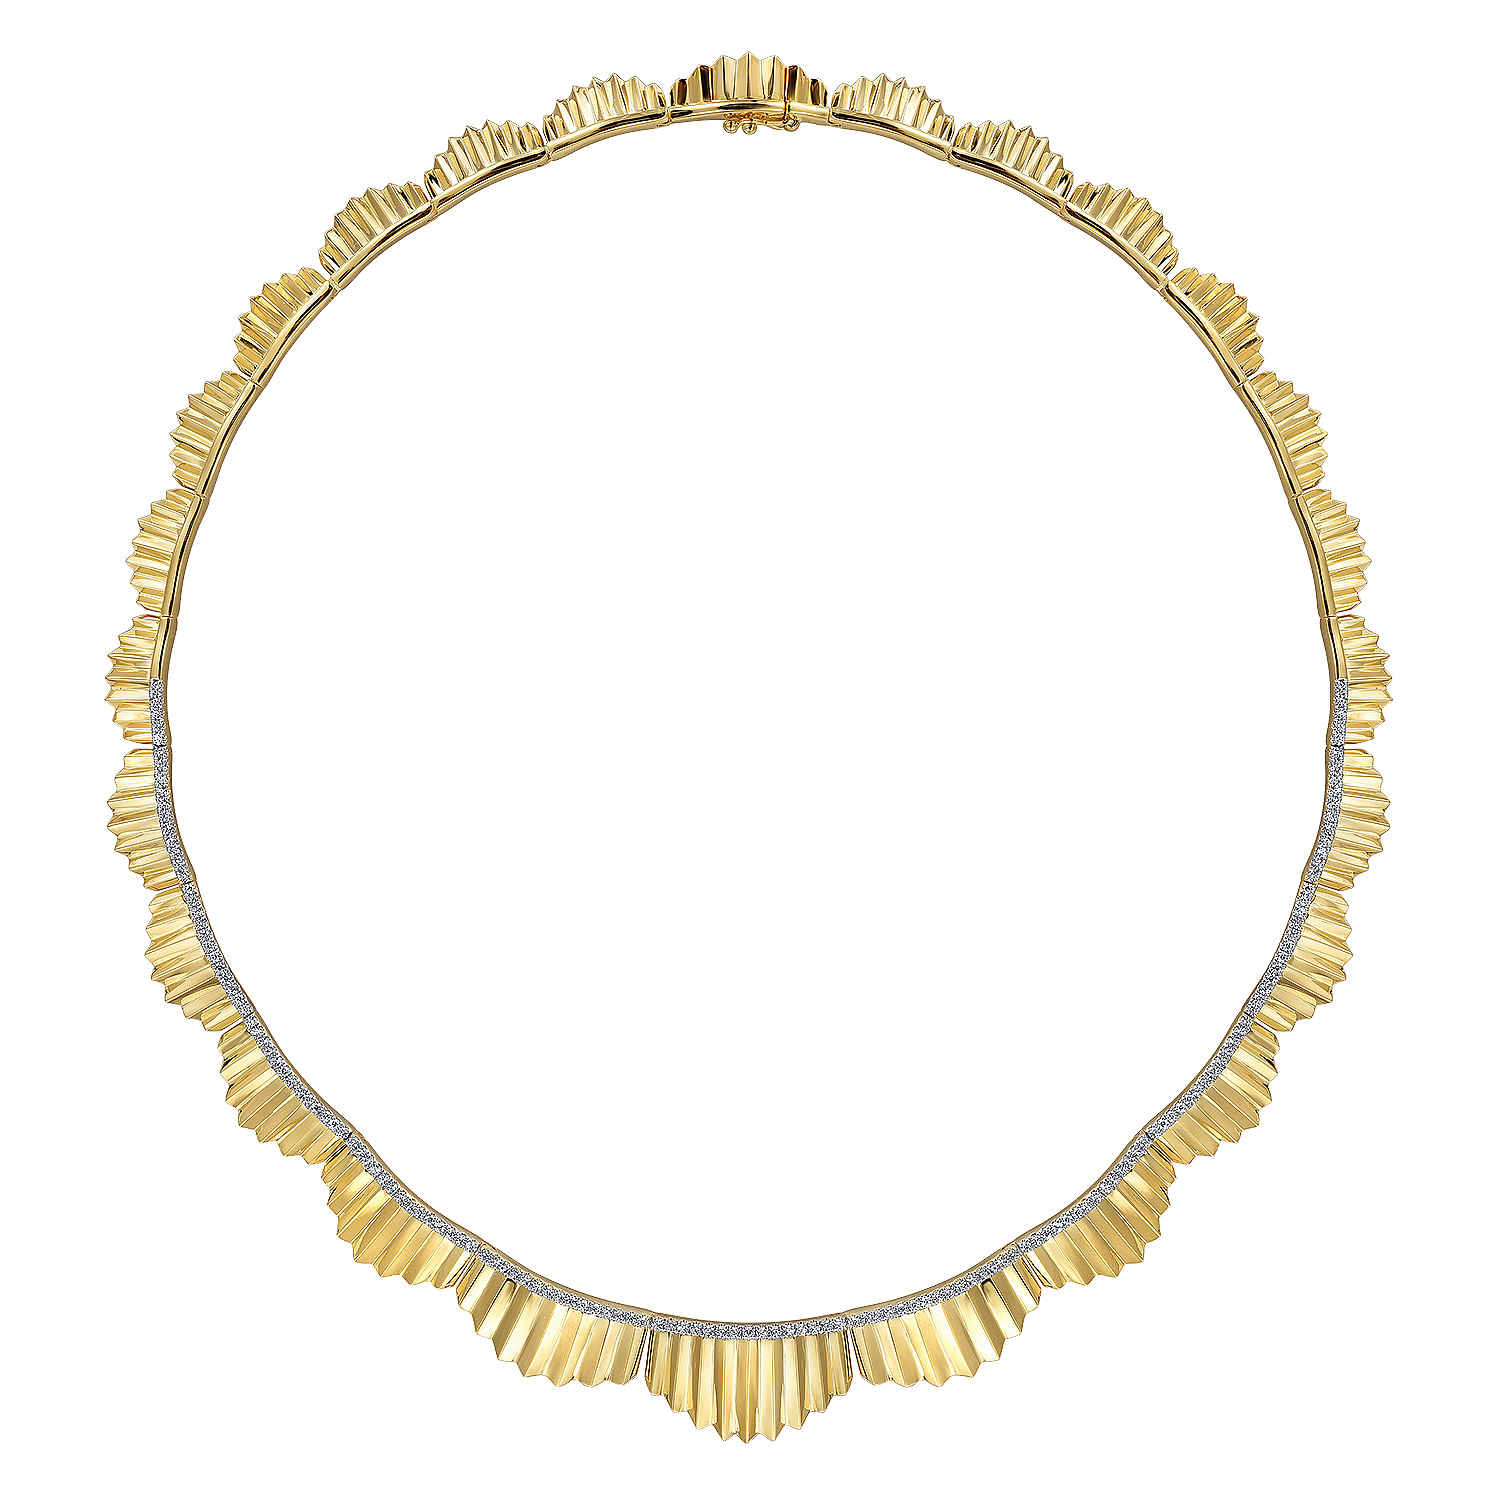 14K Yellow Gold 16 inch Diamond Necklace With Diamond Cut Texture